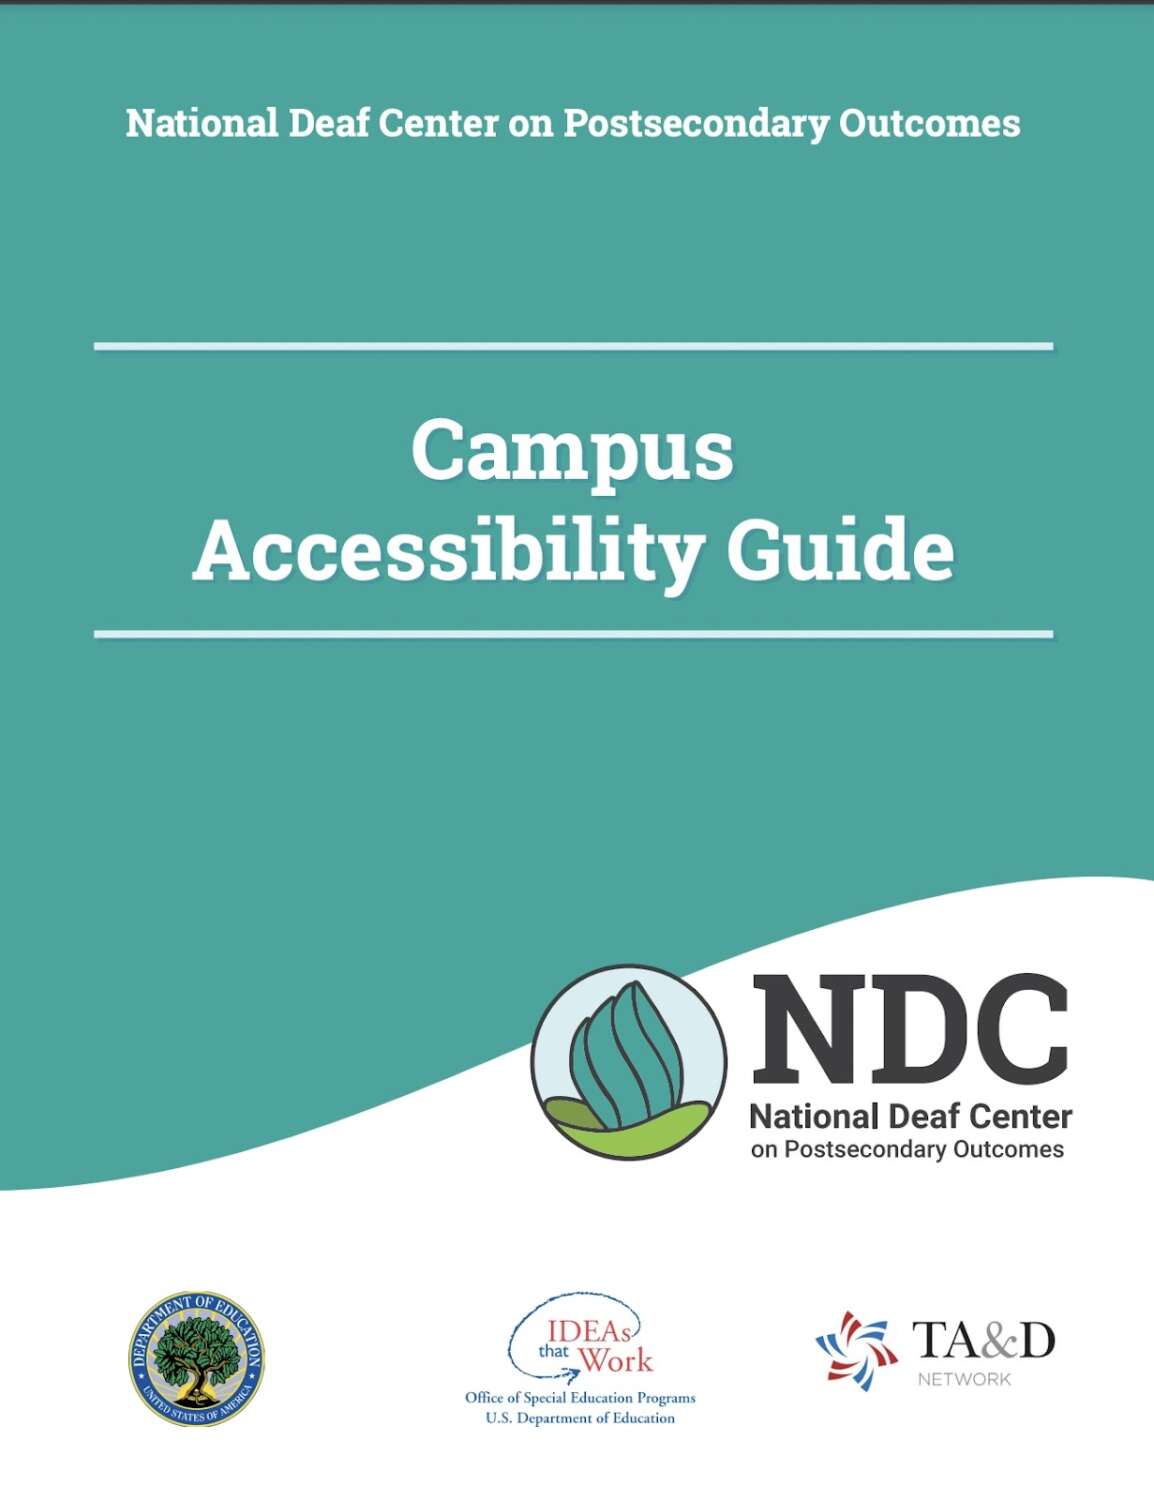 The image is a screenshot of a guide book displaying the National Deaf Center on Postsecondary Outcomes Campus Accessibility Guide.